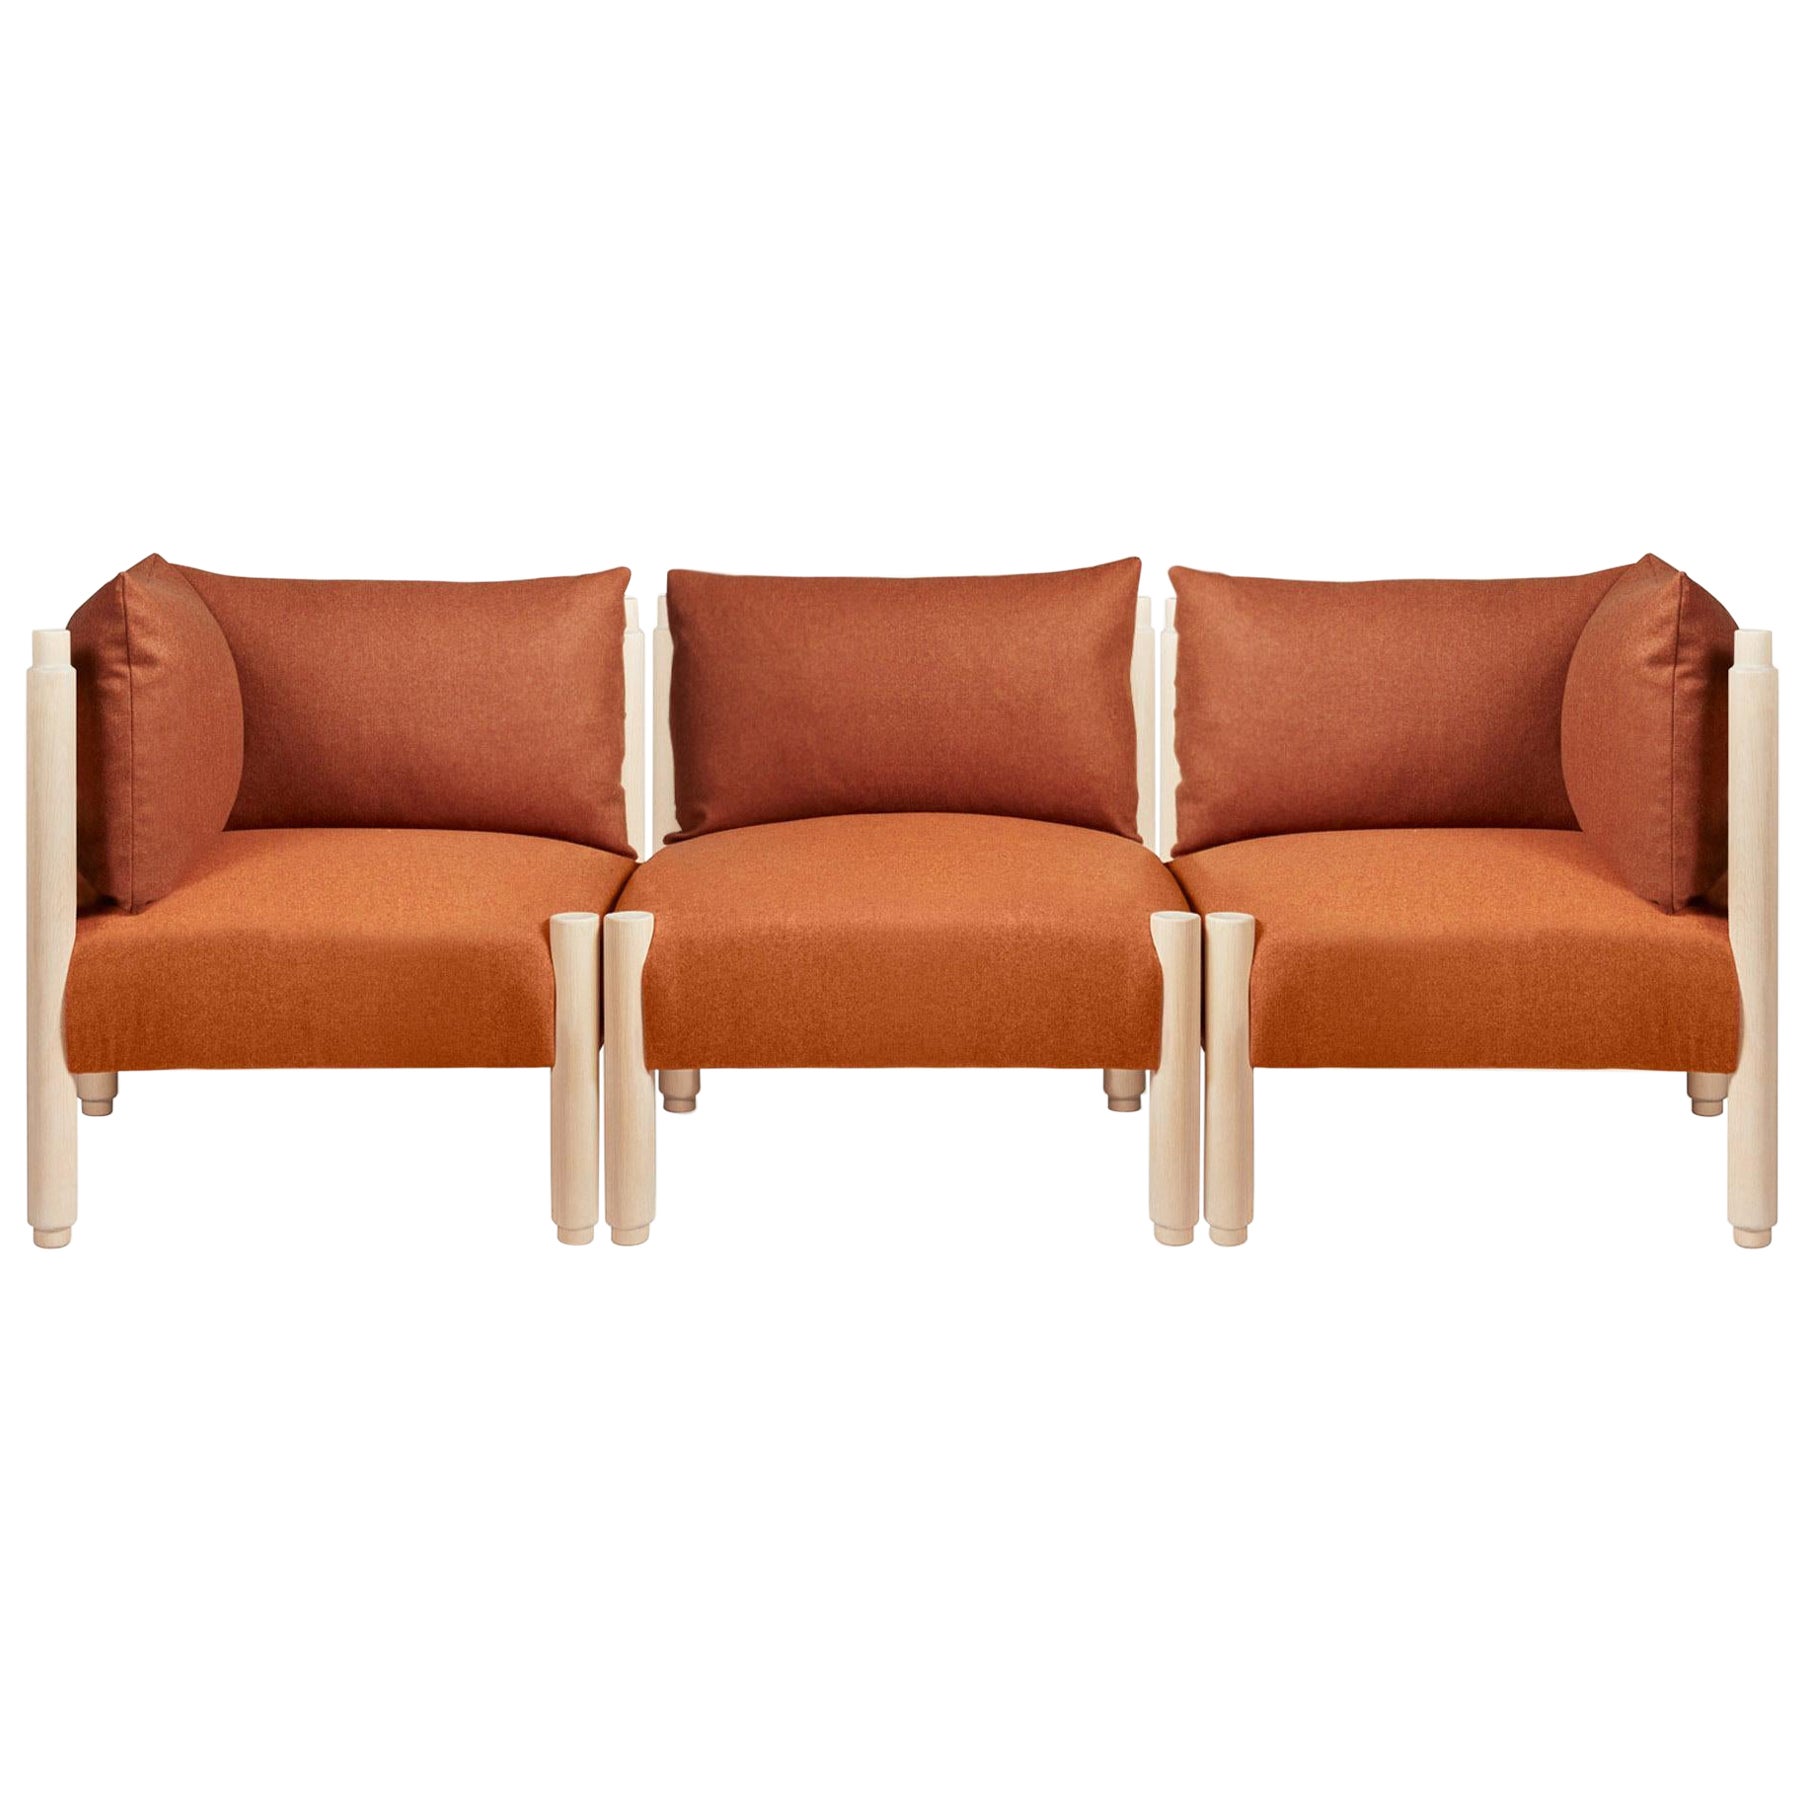 Natural and Orange Stand by Me Sofa with Pillows by Storängen Design For Sale